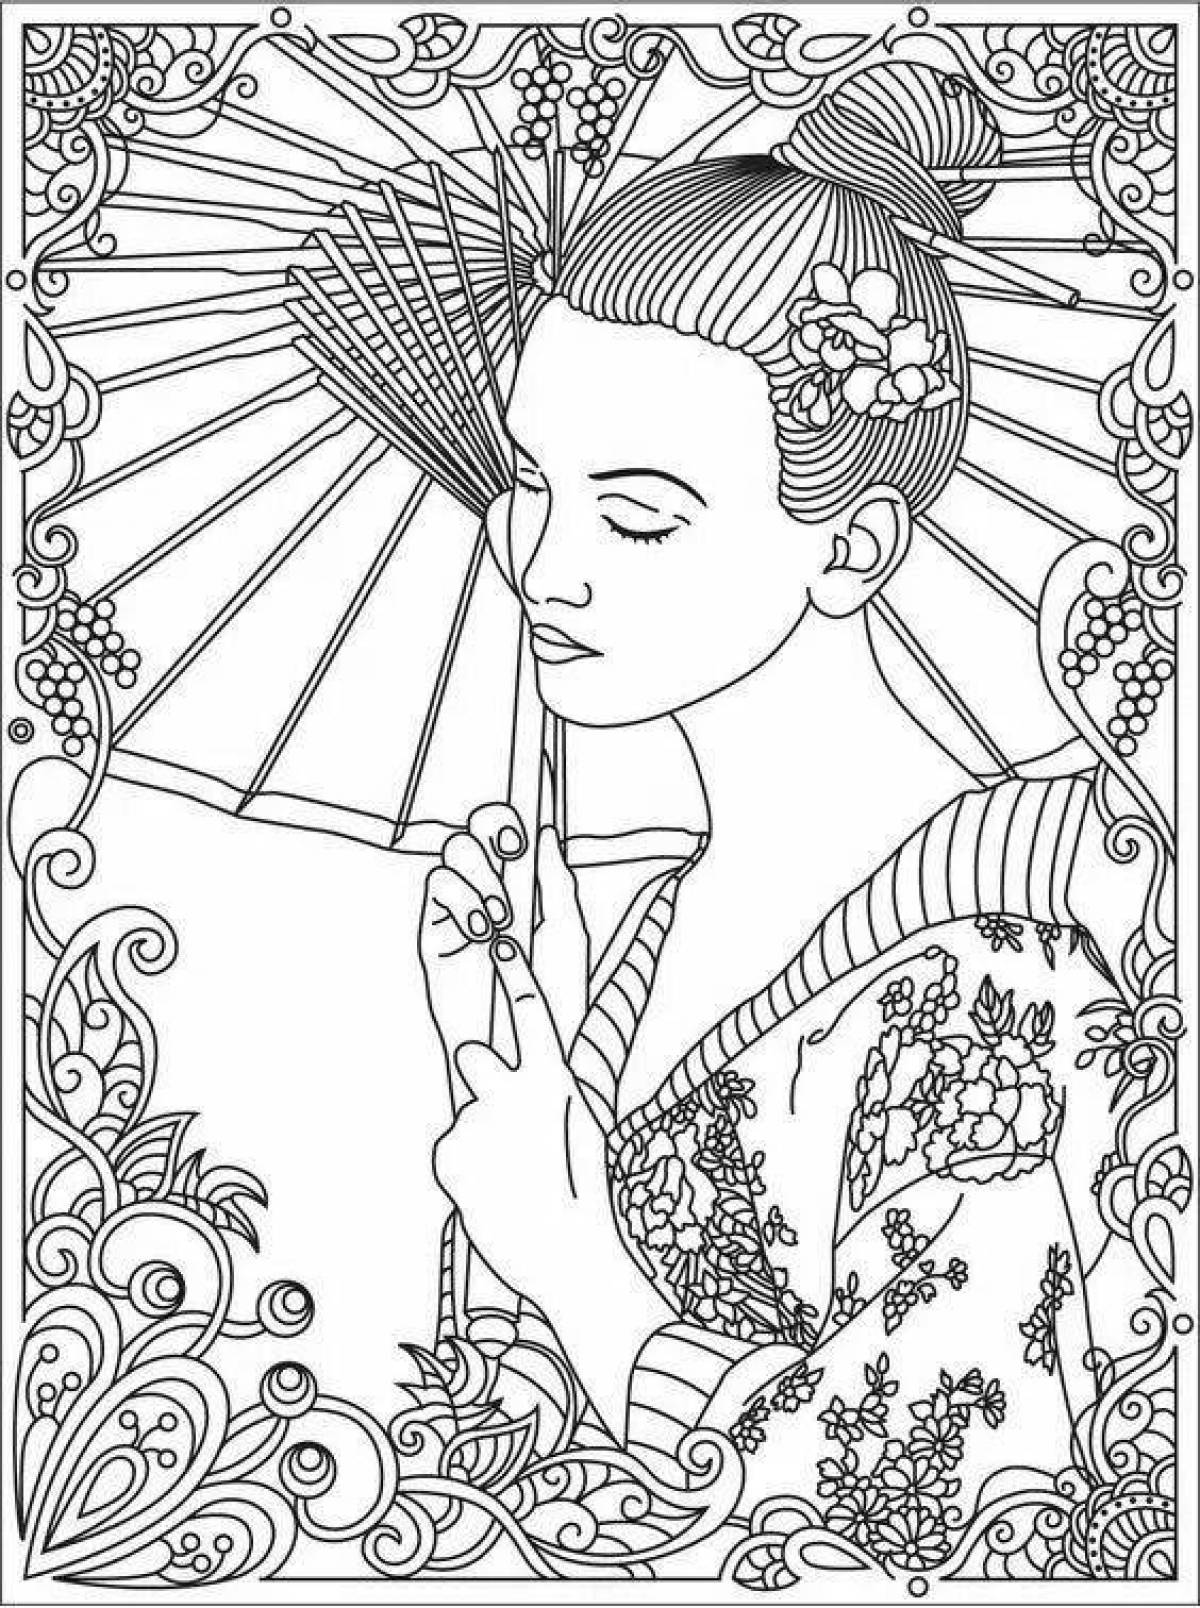 Fancy Japanese coloring book